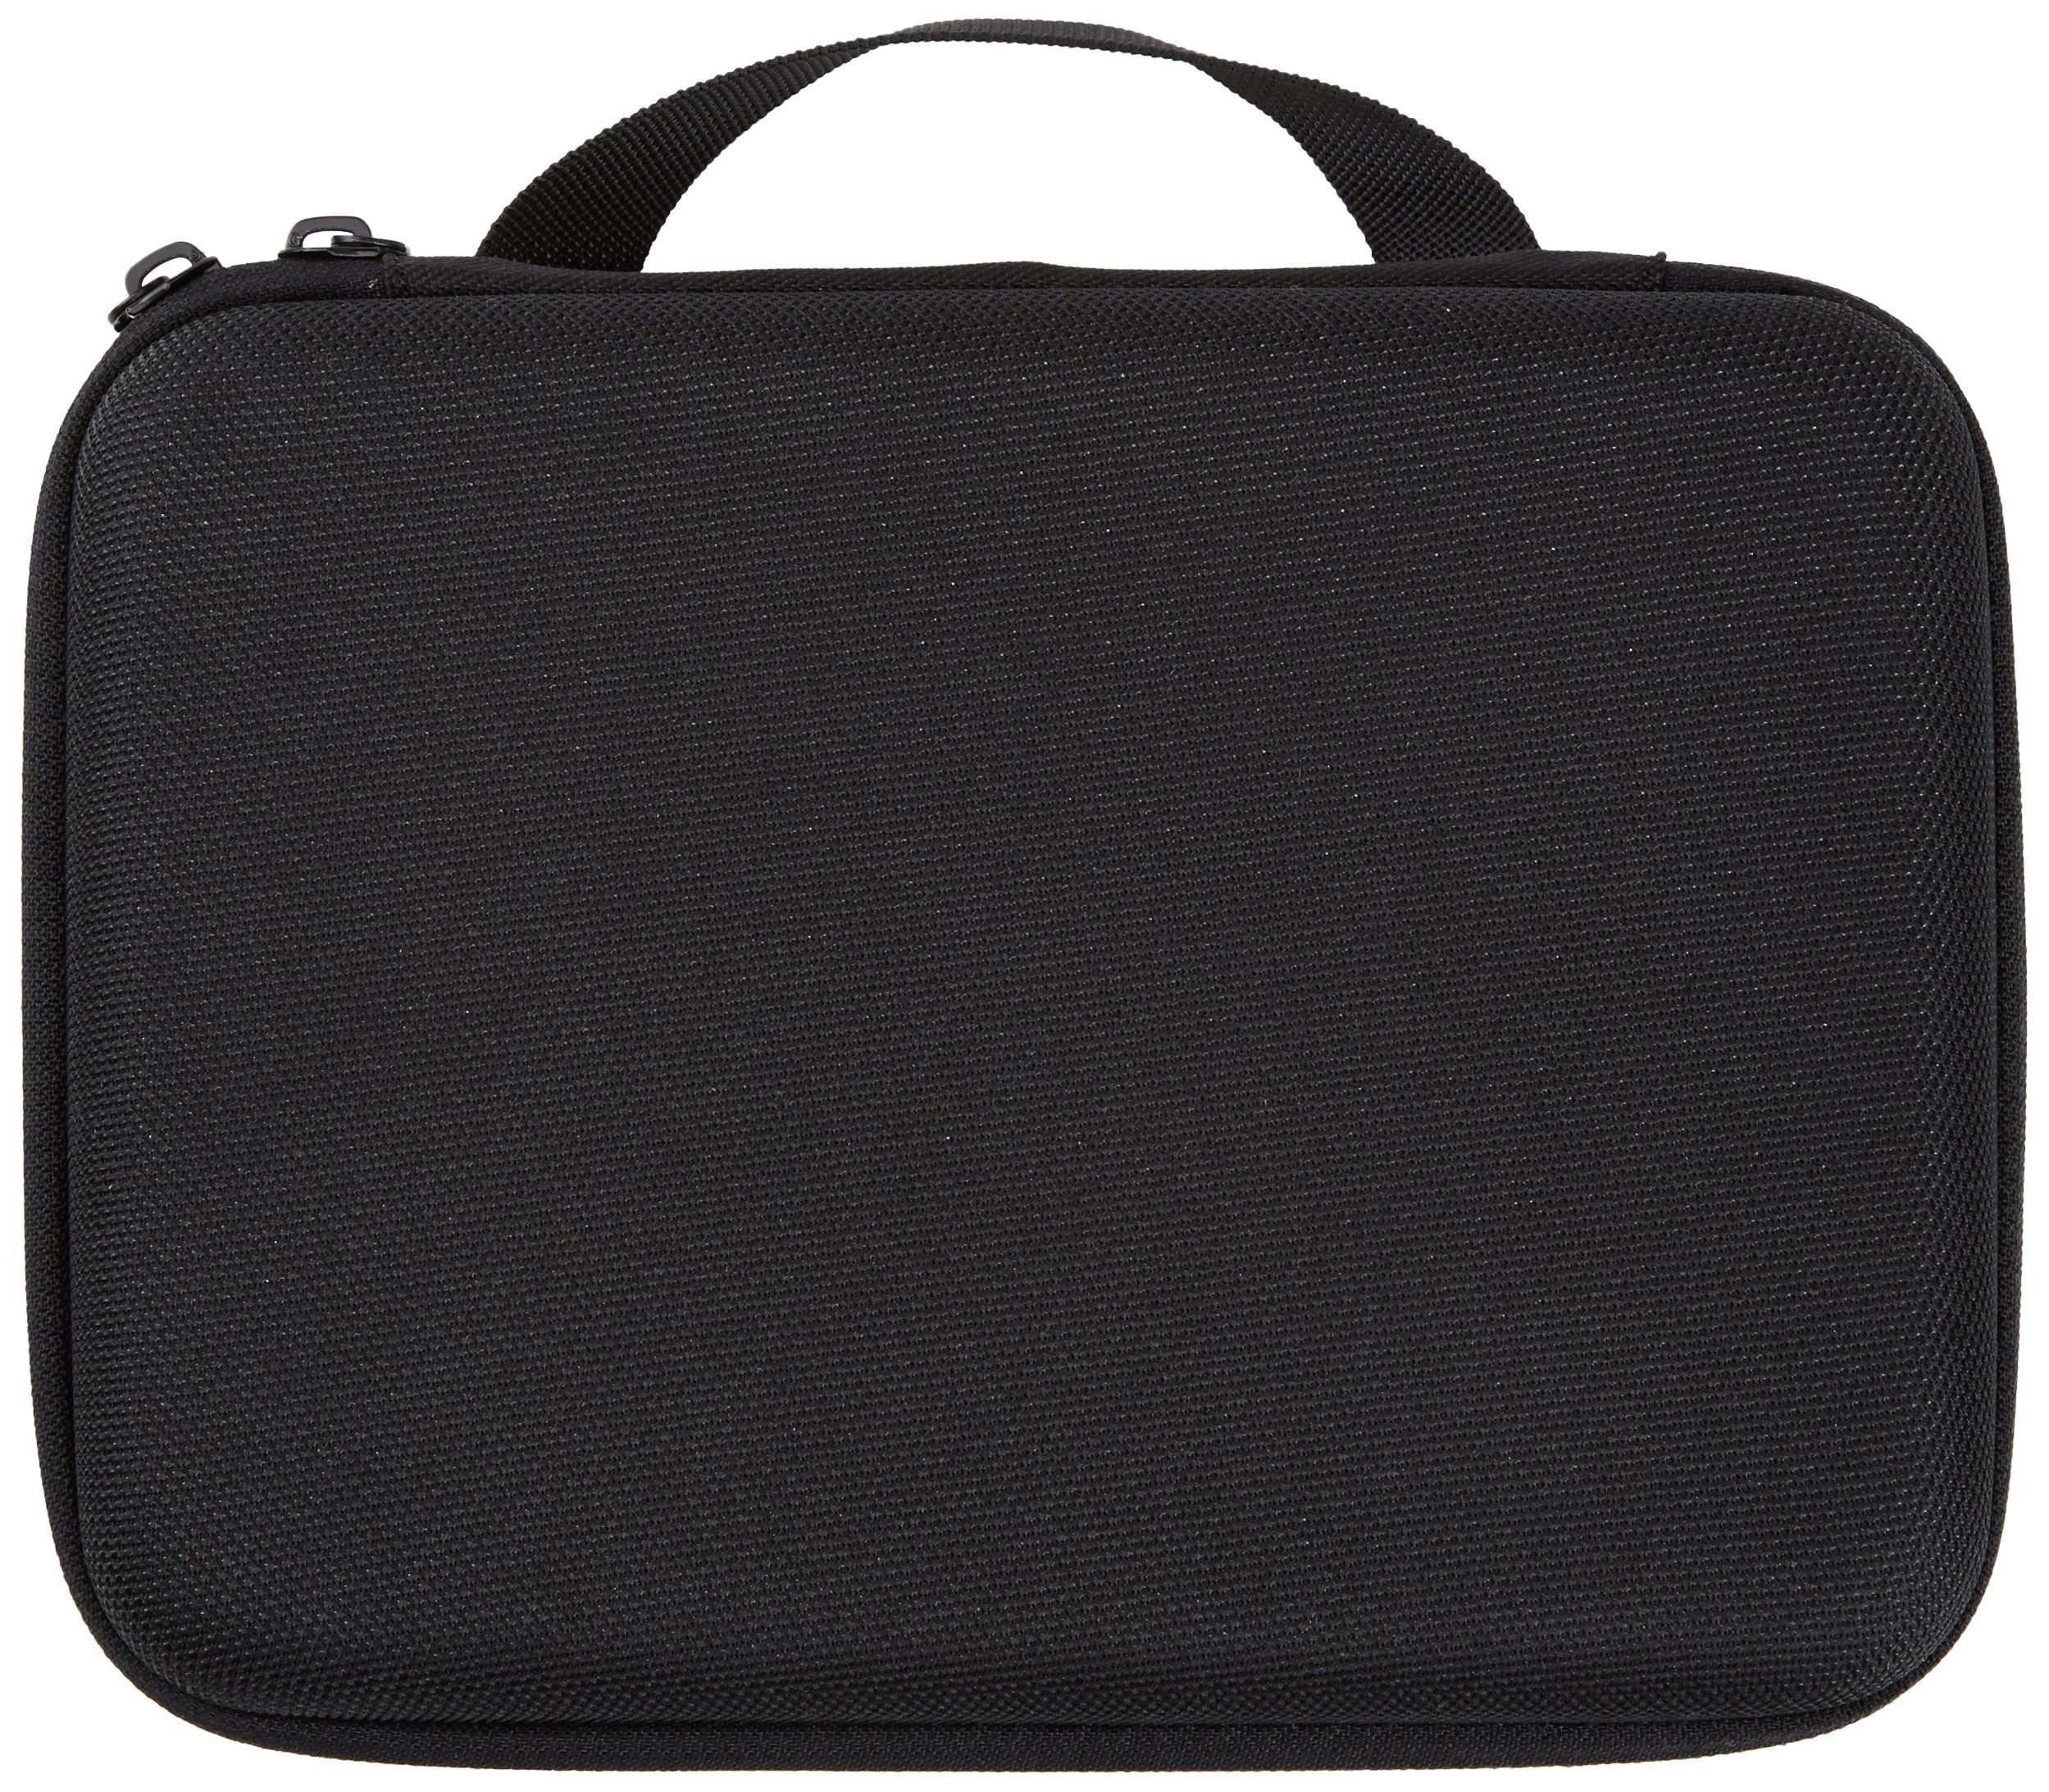 Amazon Basics Small Carrying Case for GoPro And Accessories - 9 x 7 x 2.5 Inches, Black